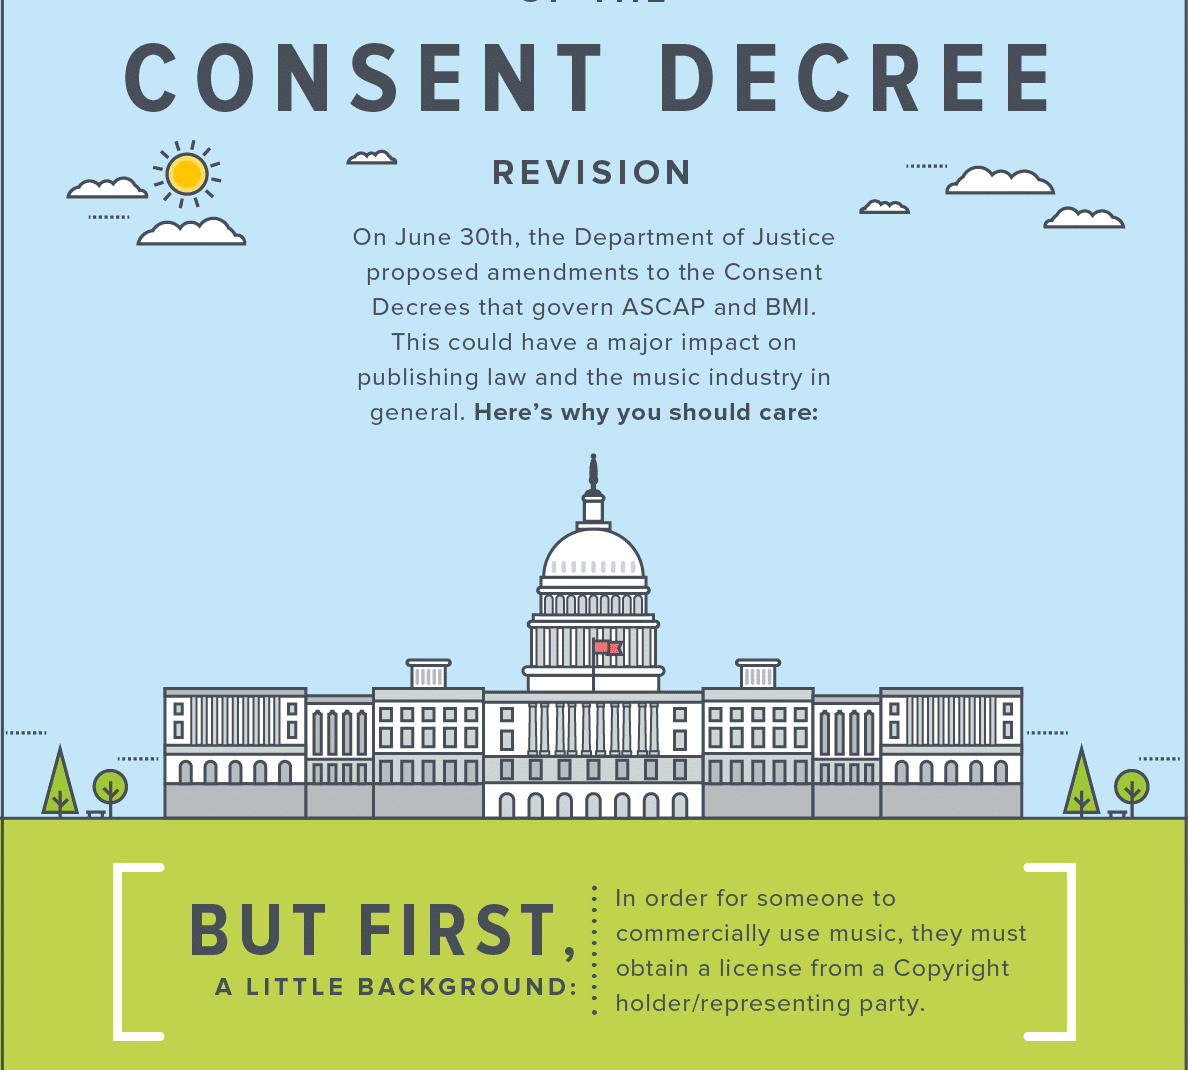 Guest Blog: Impacts Of The Consent Decree Revision (Infographic)